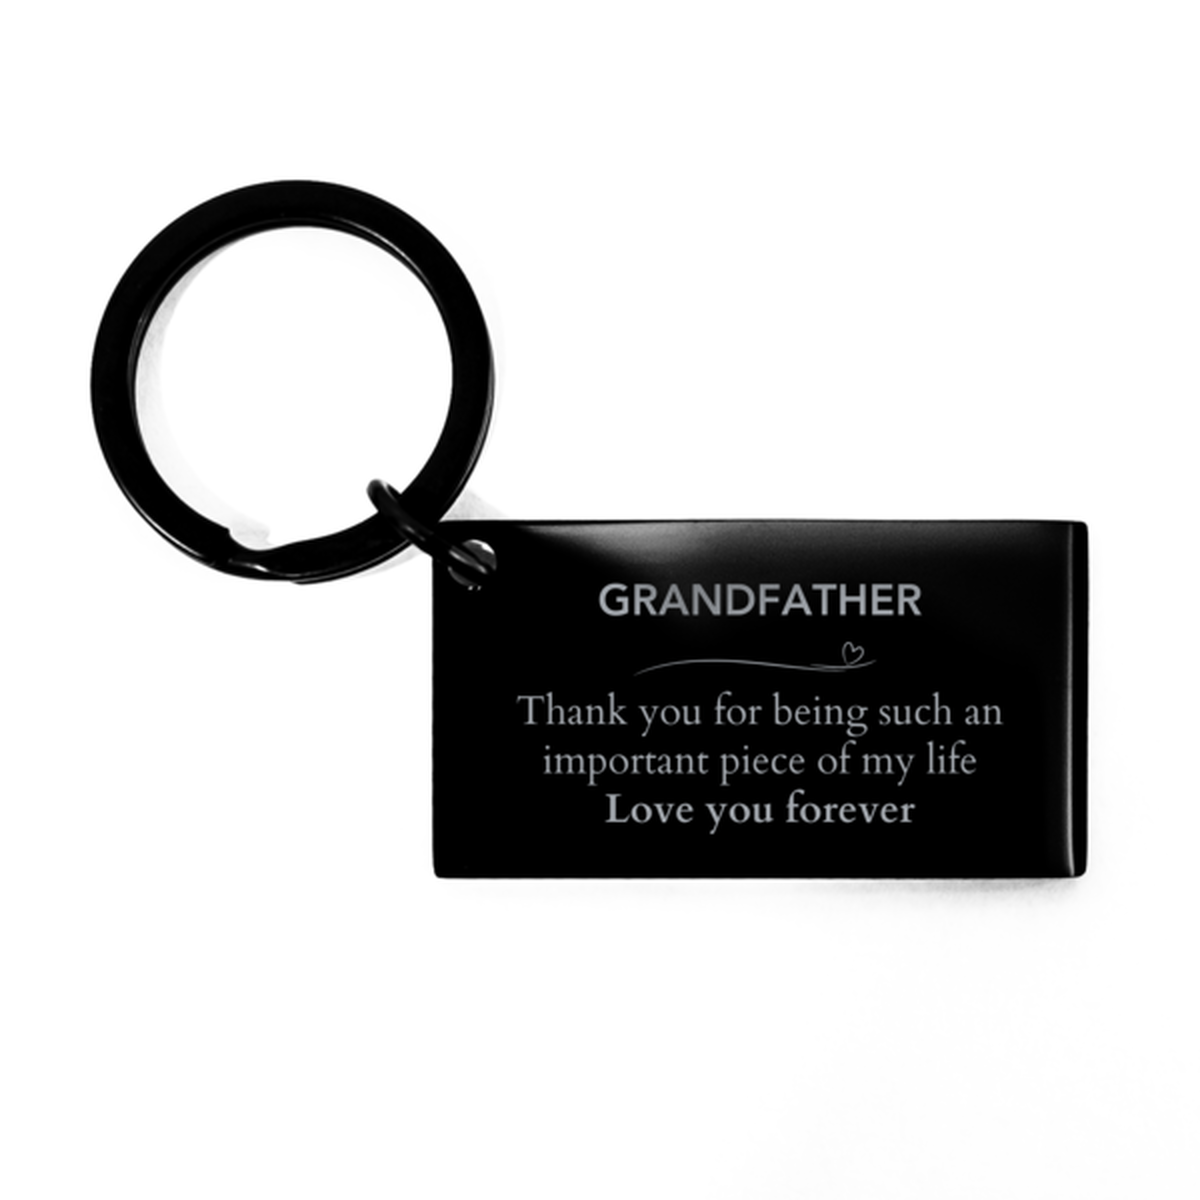 Appropriate Grandfather Keychain Epic Birthday Gifts for Grandfather Thank you for being such an important piece of my life Grandfather Christmas Mothers Fathers Day